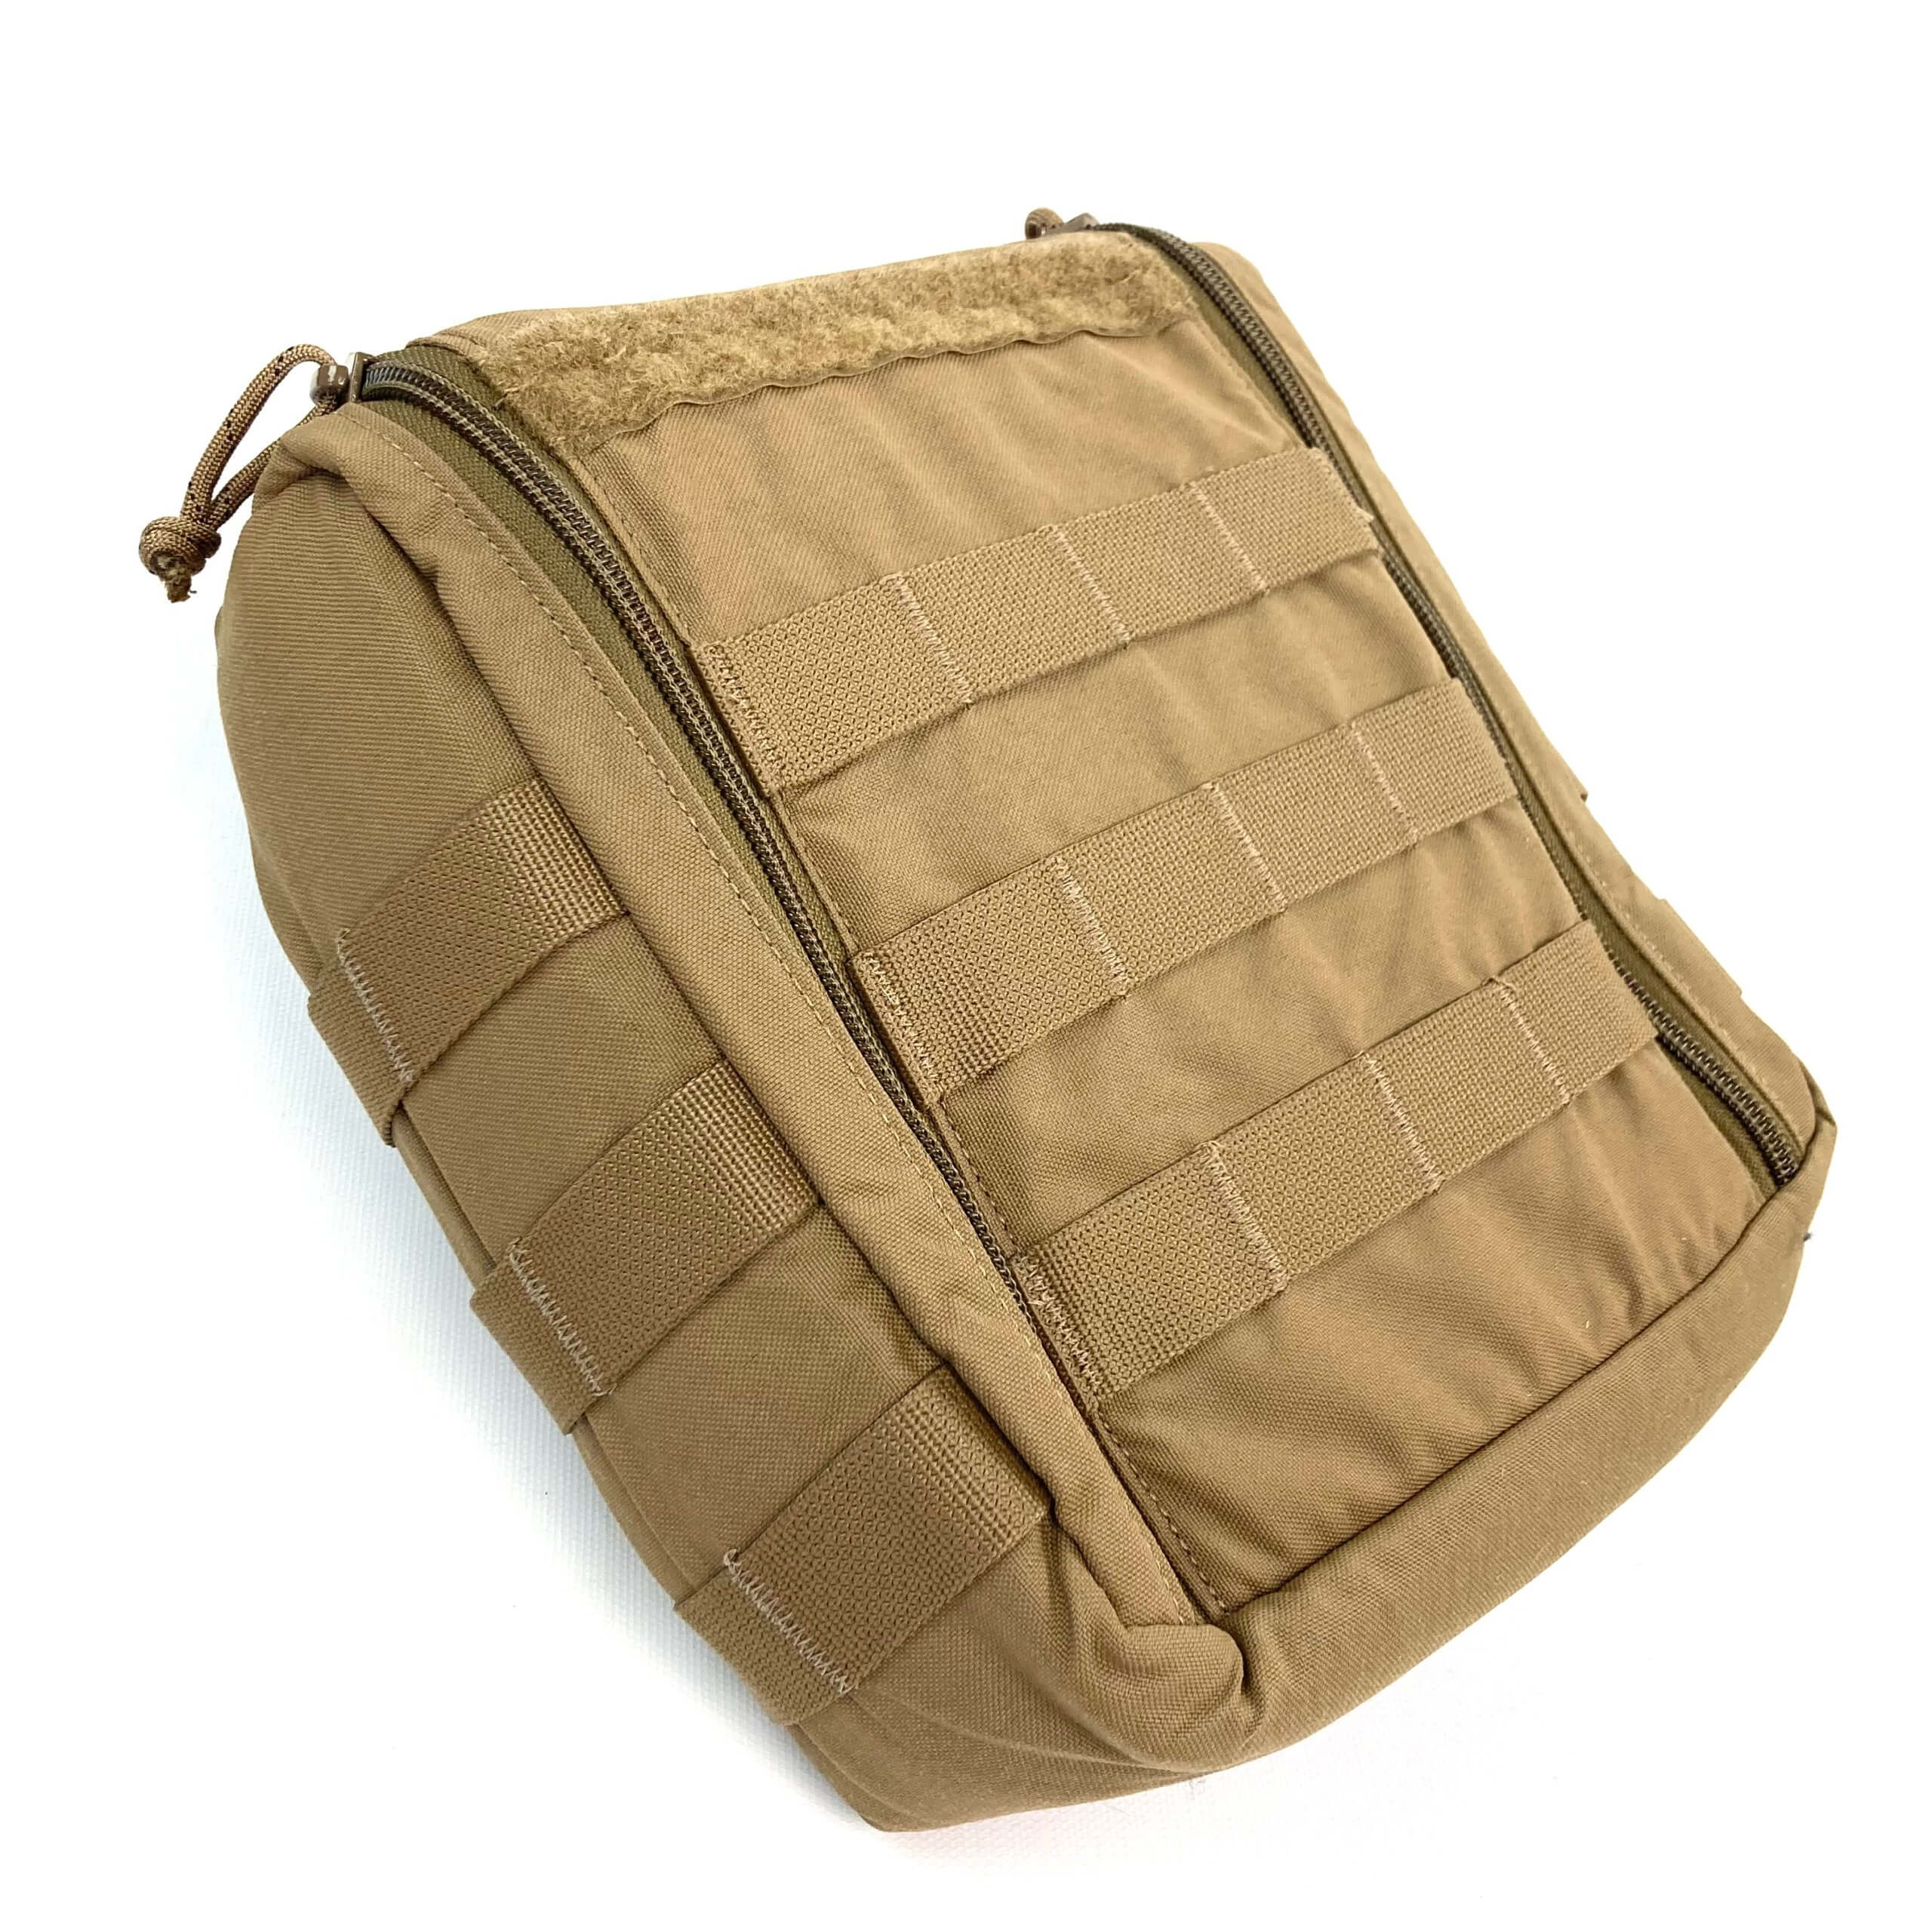 9MM AMMO MODULAR MOLLE UTILITY POUCHES FRONT HOOK LOOP STRAP 3 